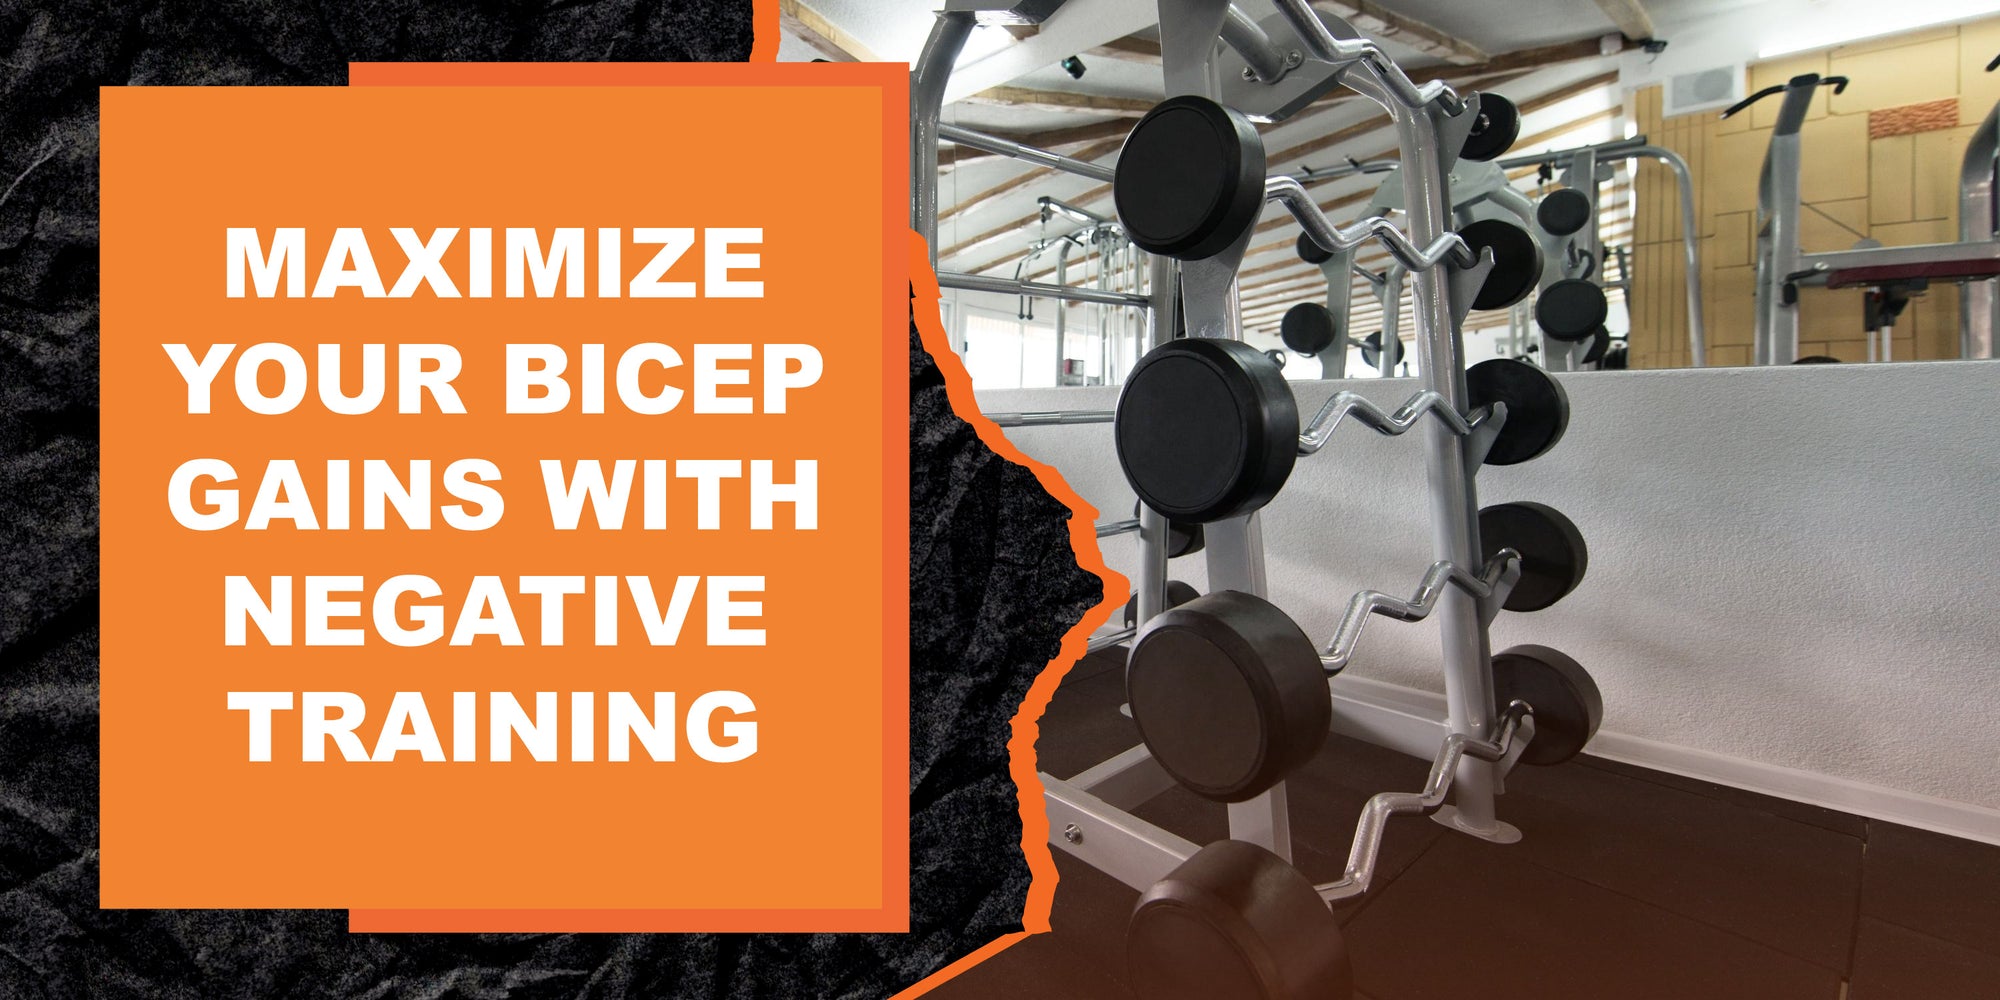 Maximize Your Bicep Gains with Negative Training